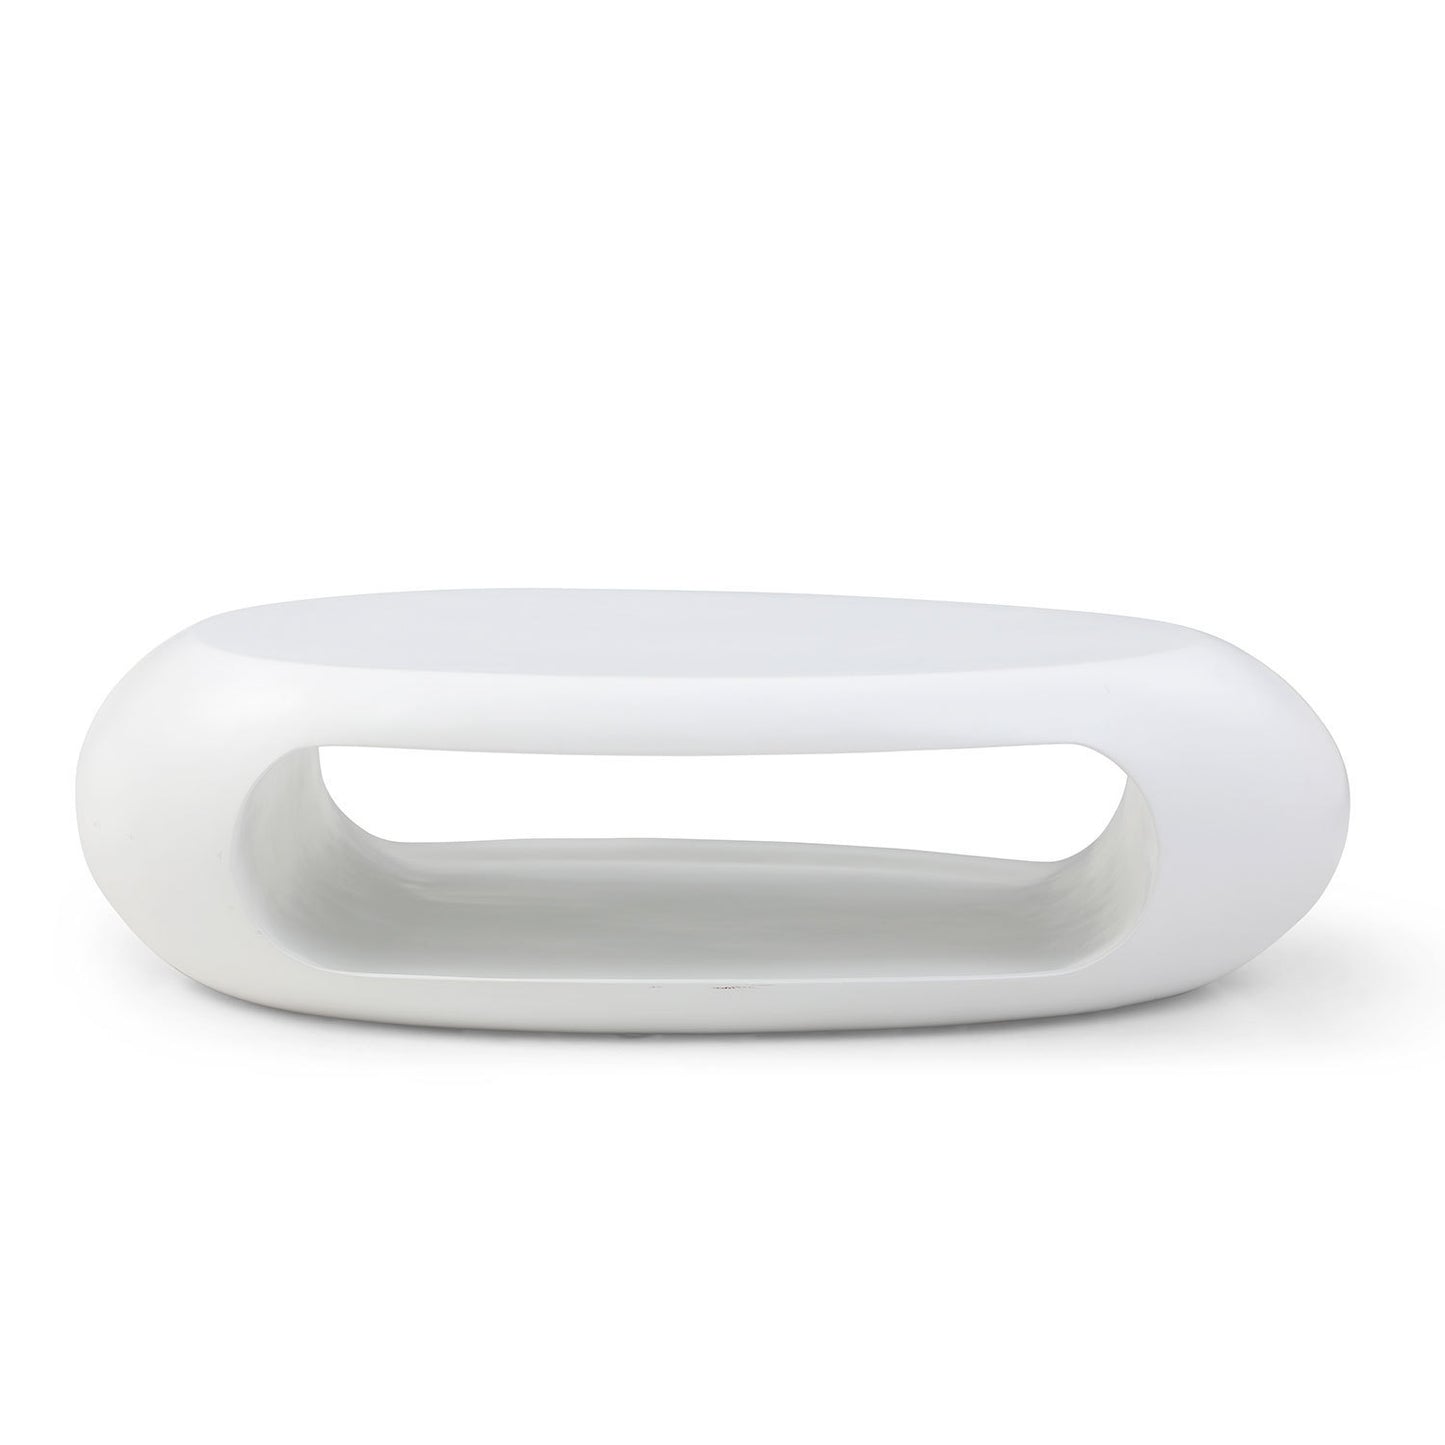 Elegant 53.15 Oval Fiberglass Coffee Table for Living Room in White, Ready-To-Use